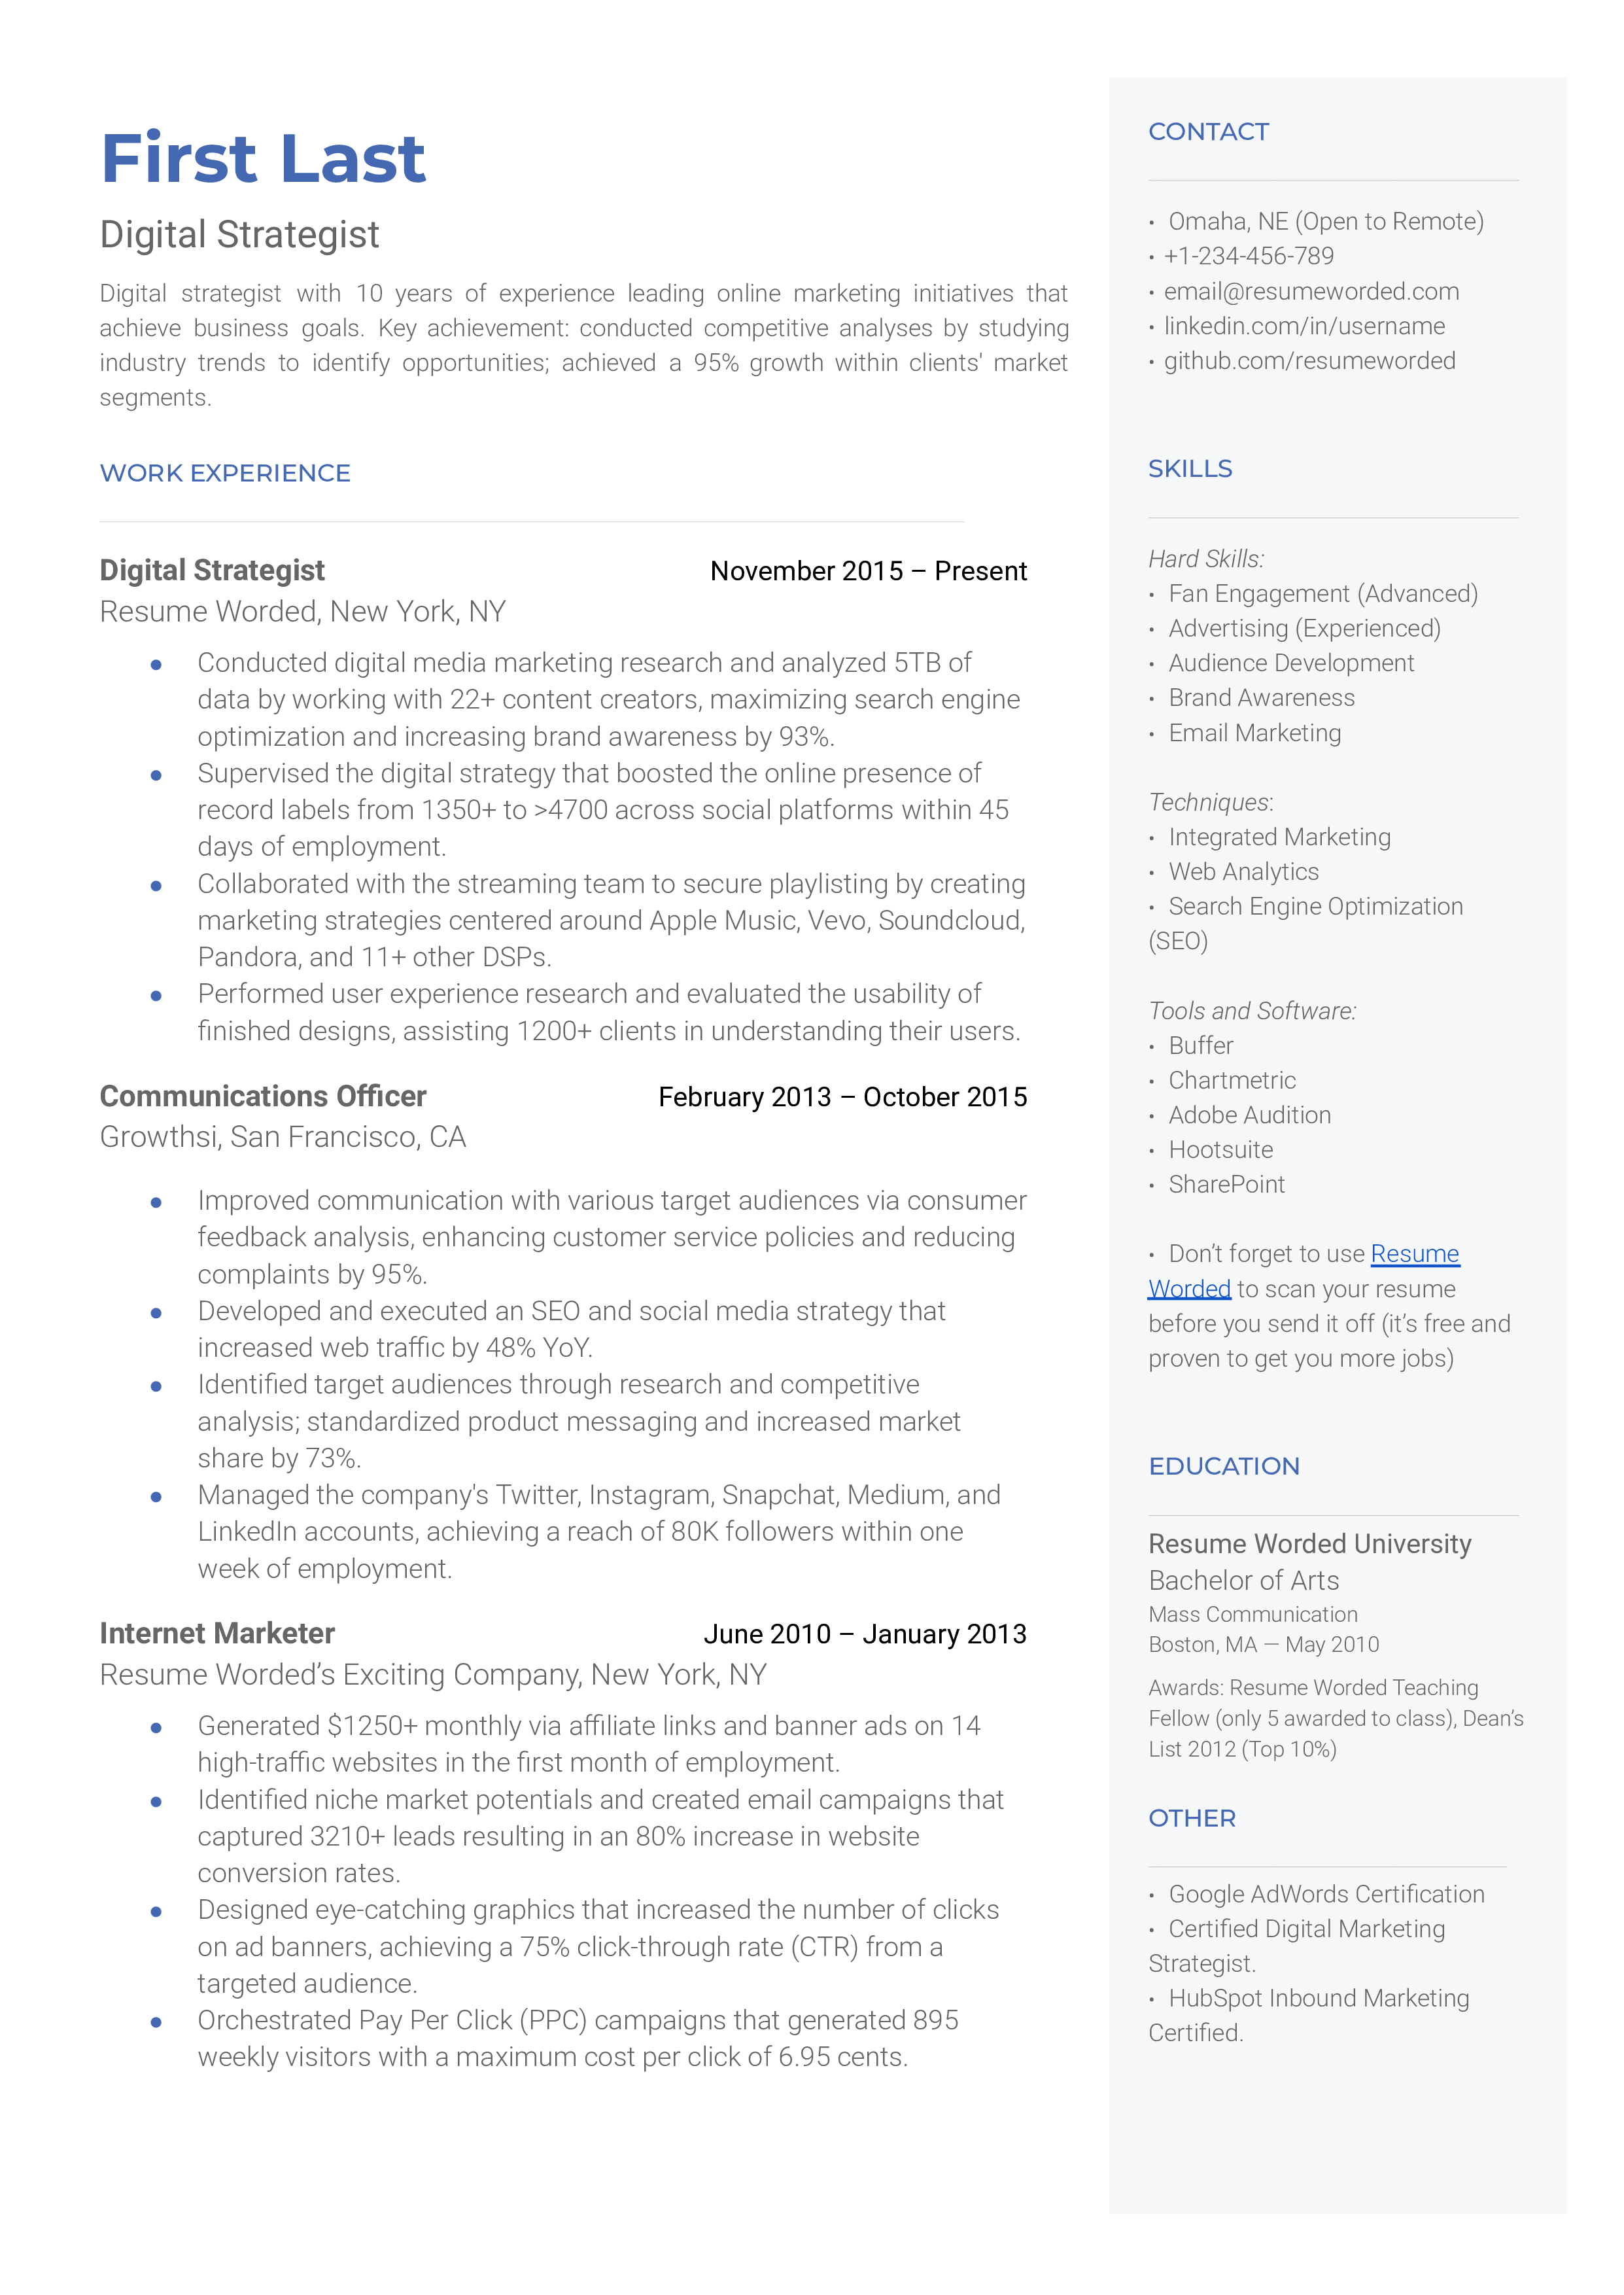 A well-crafted CV for a Digital Strategist role.